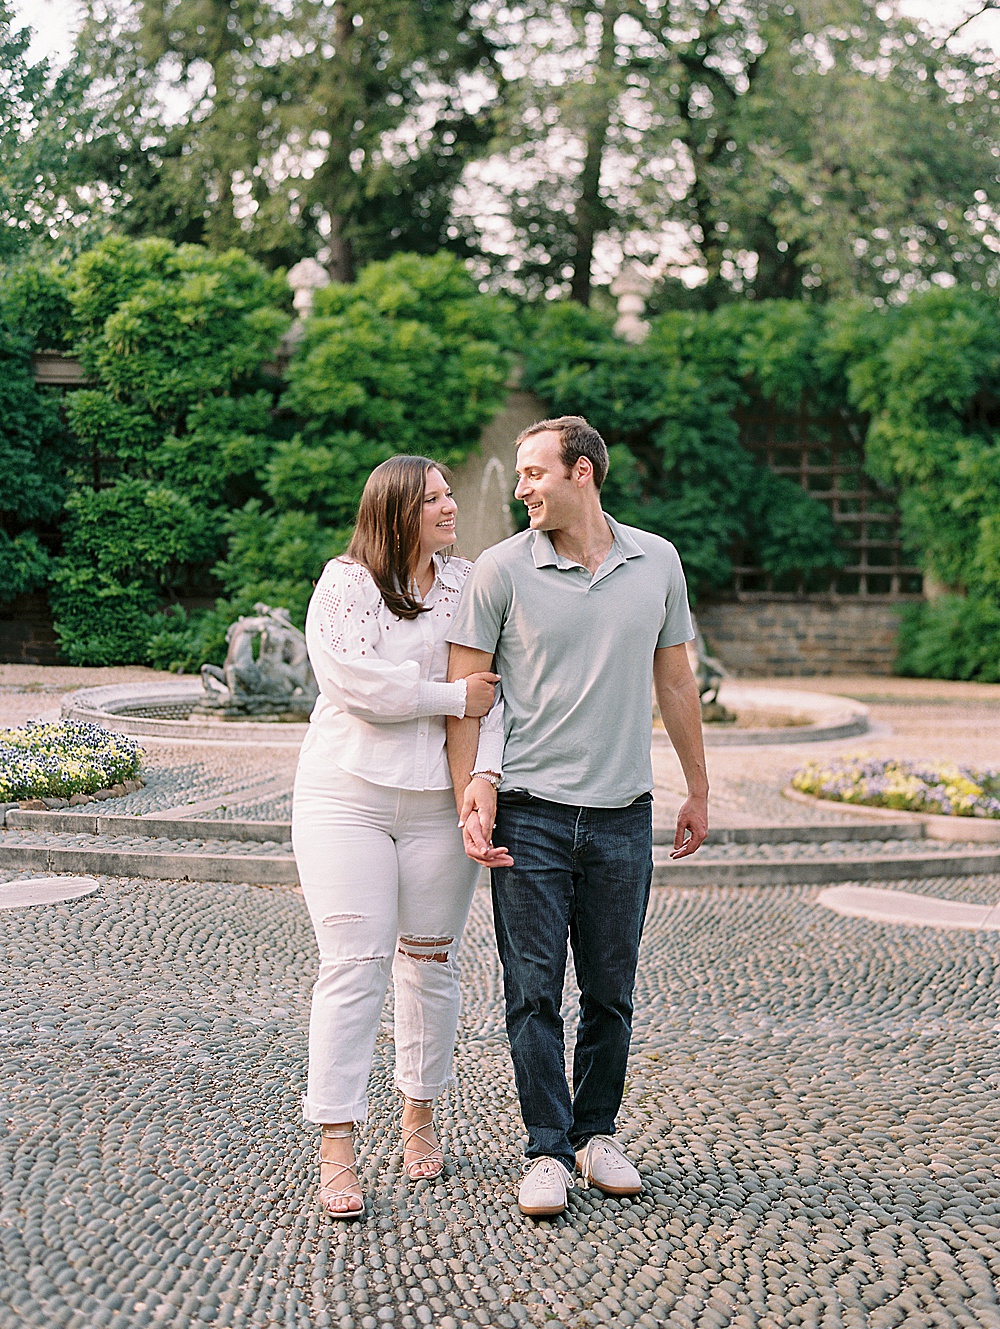 Summer Garden engagement session in Georgetown with destination wedding photographer, Renee Hollingshead